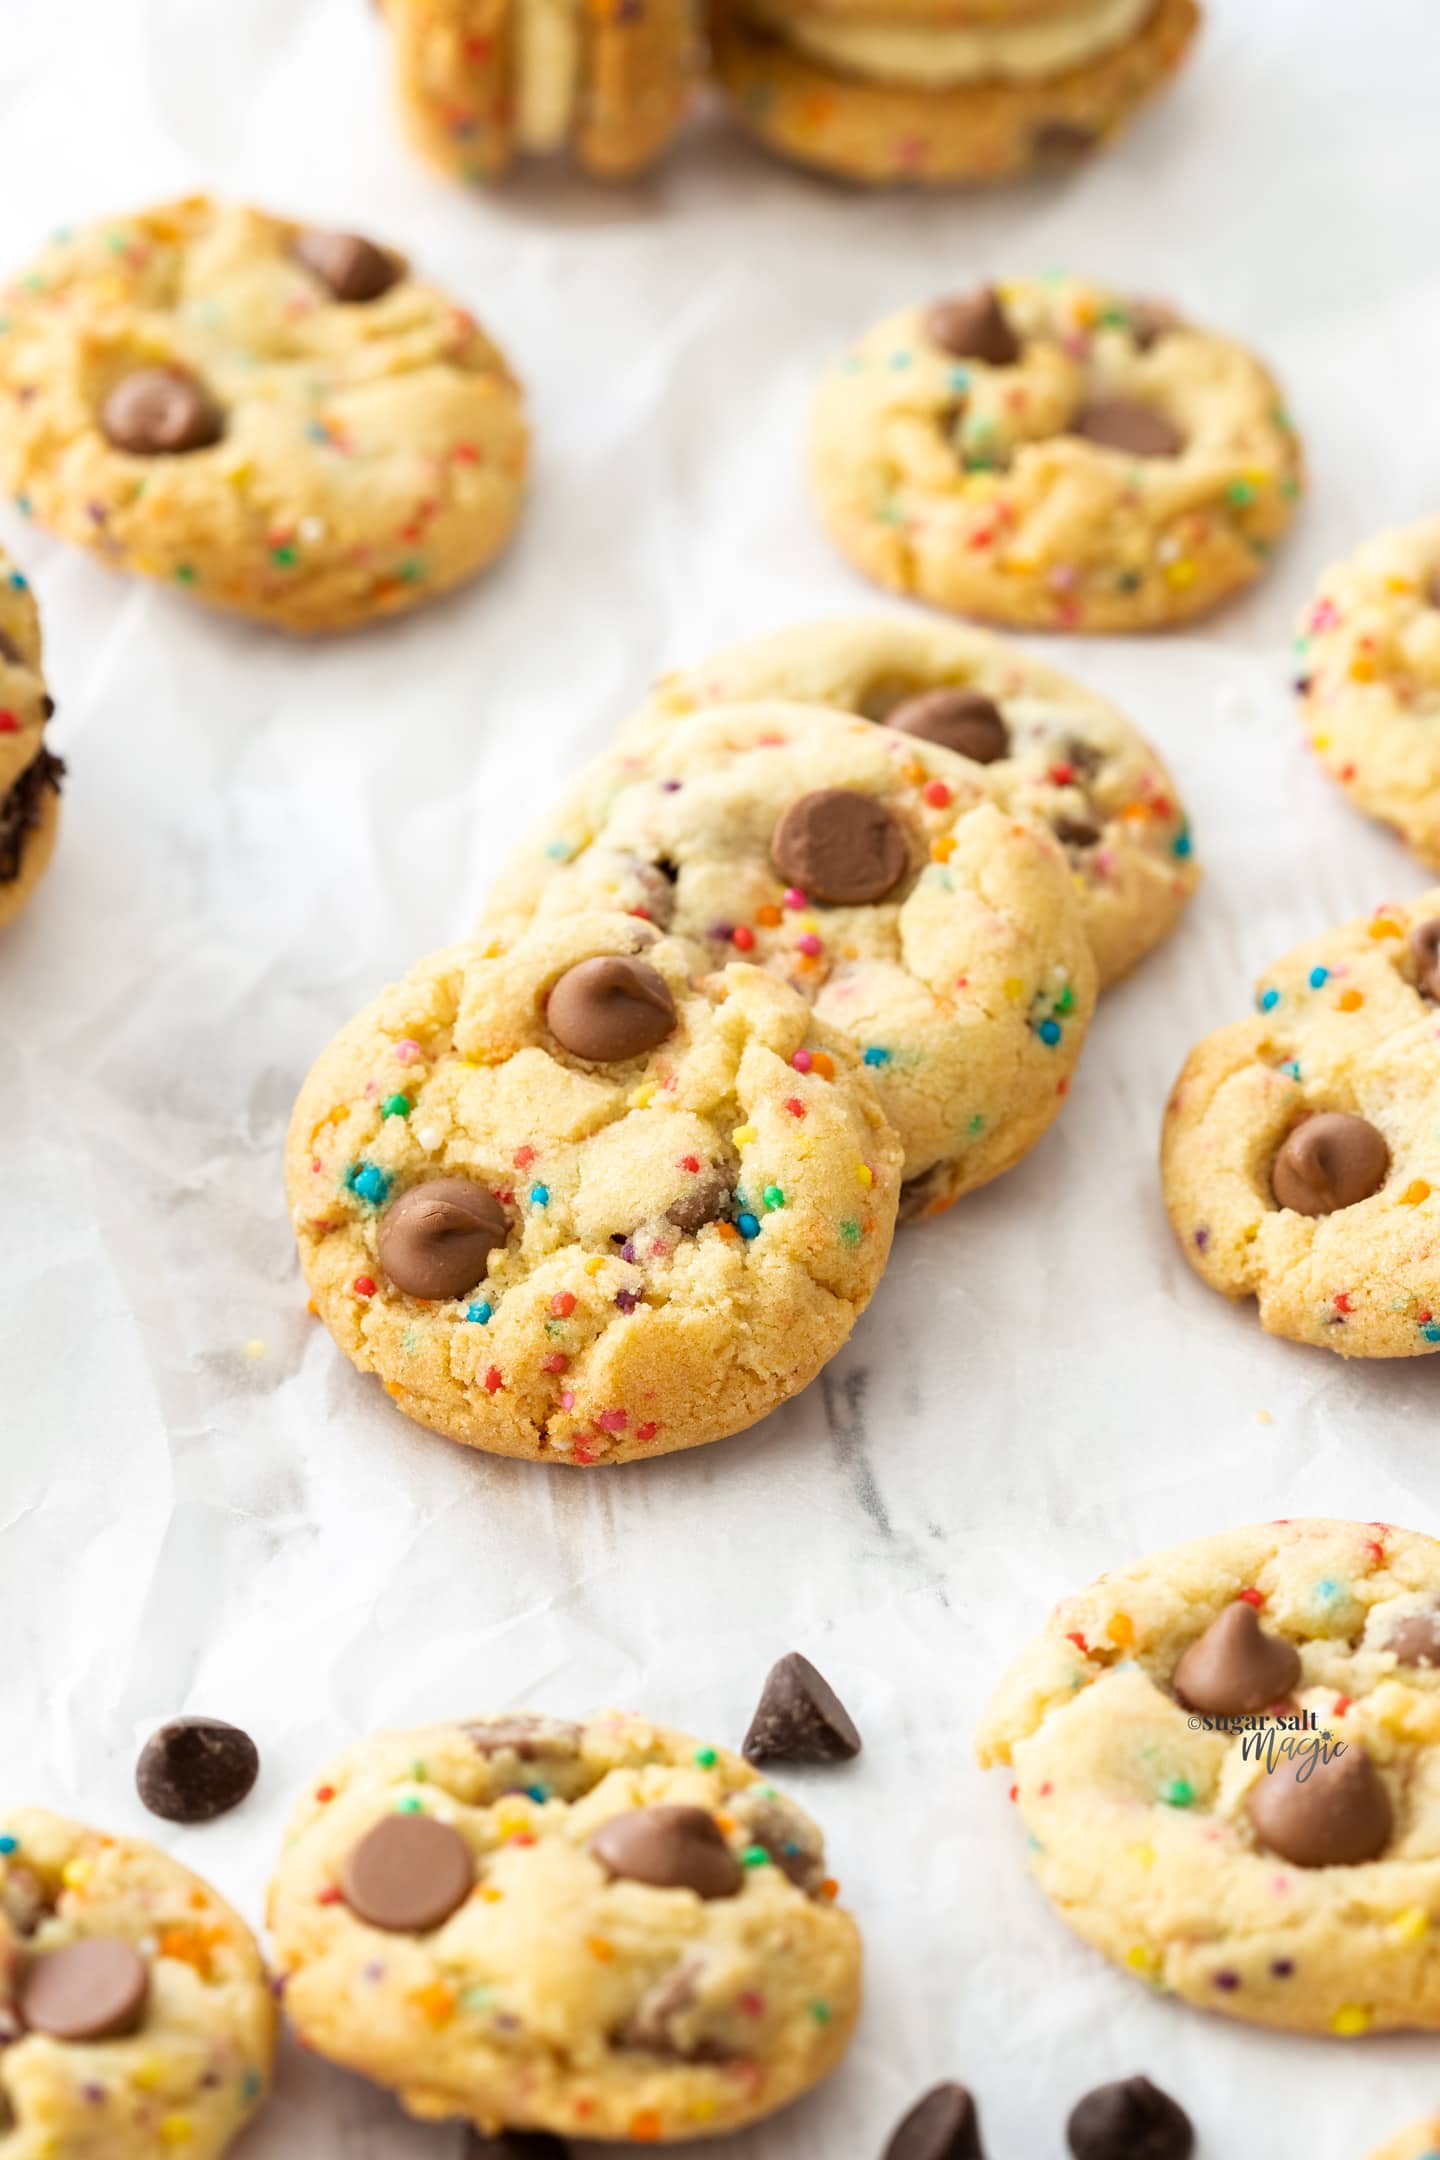 A batch of funfetti cookies with chocolate chips on a sheet of baking paper.